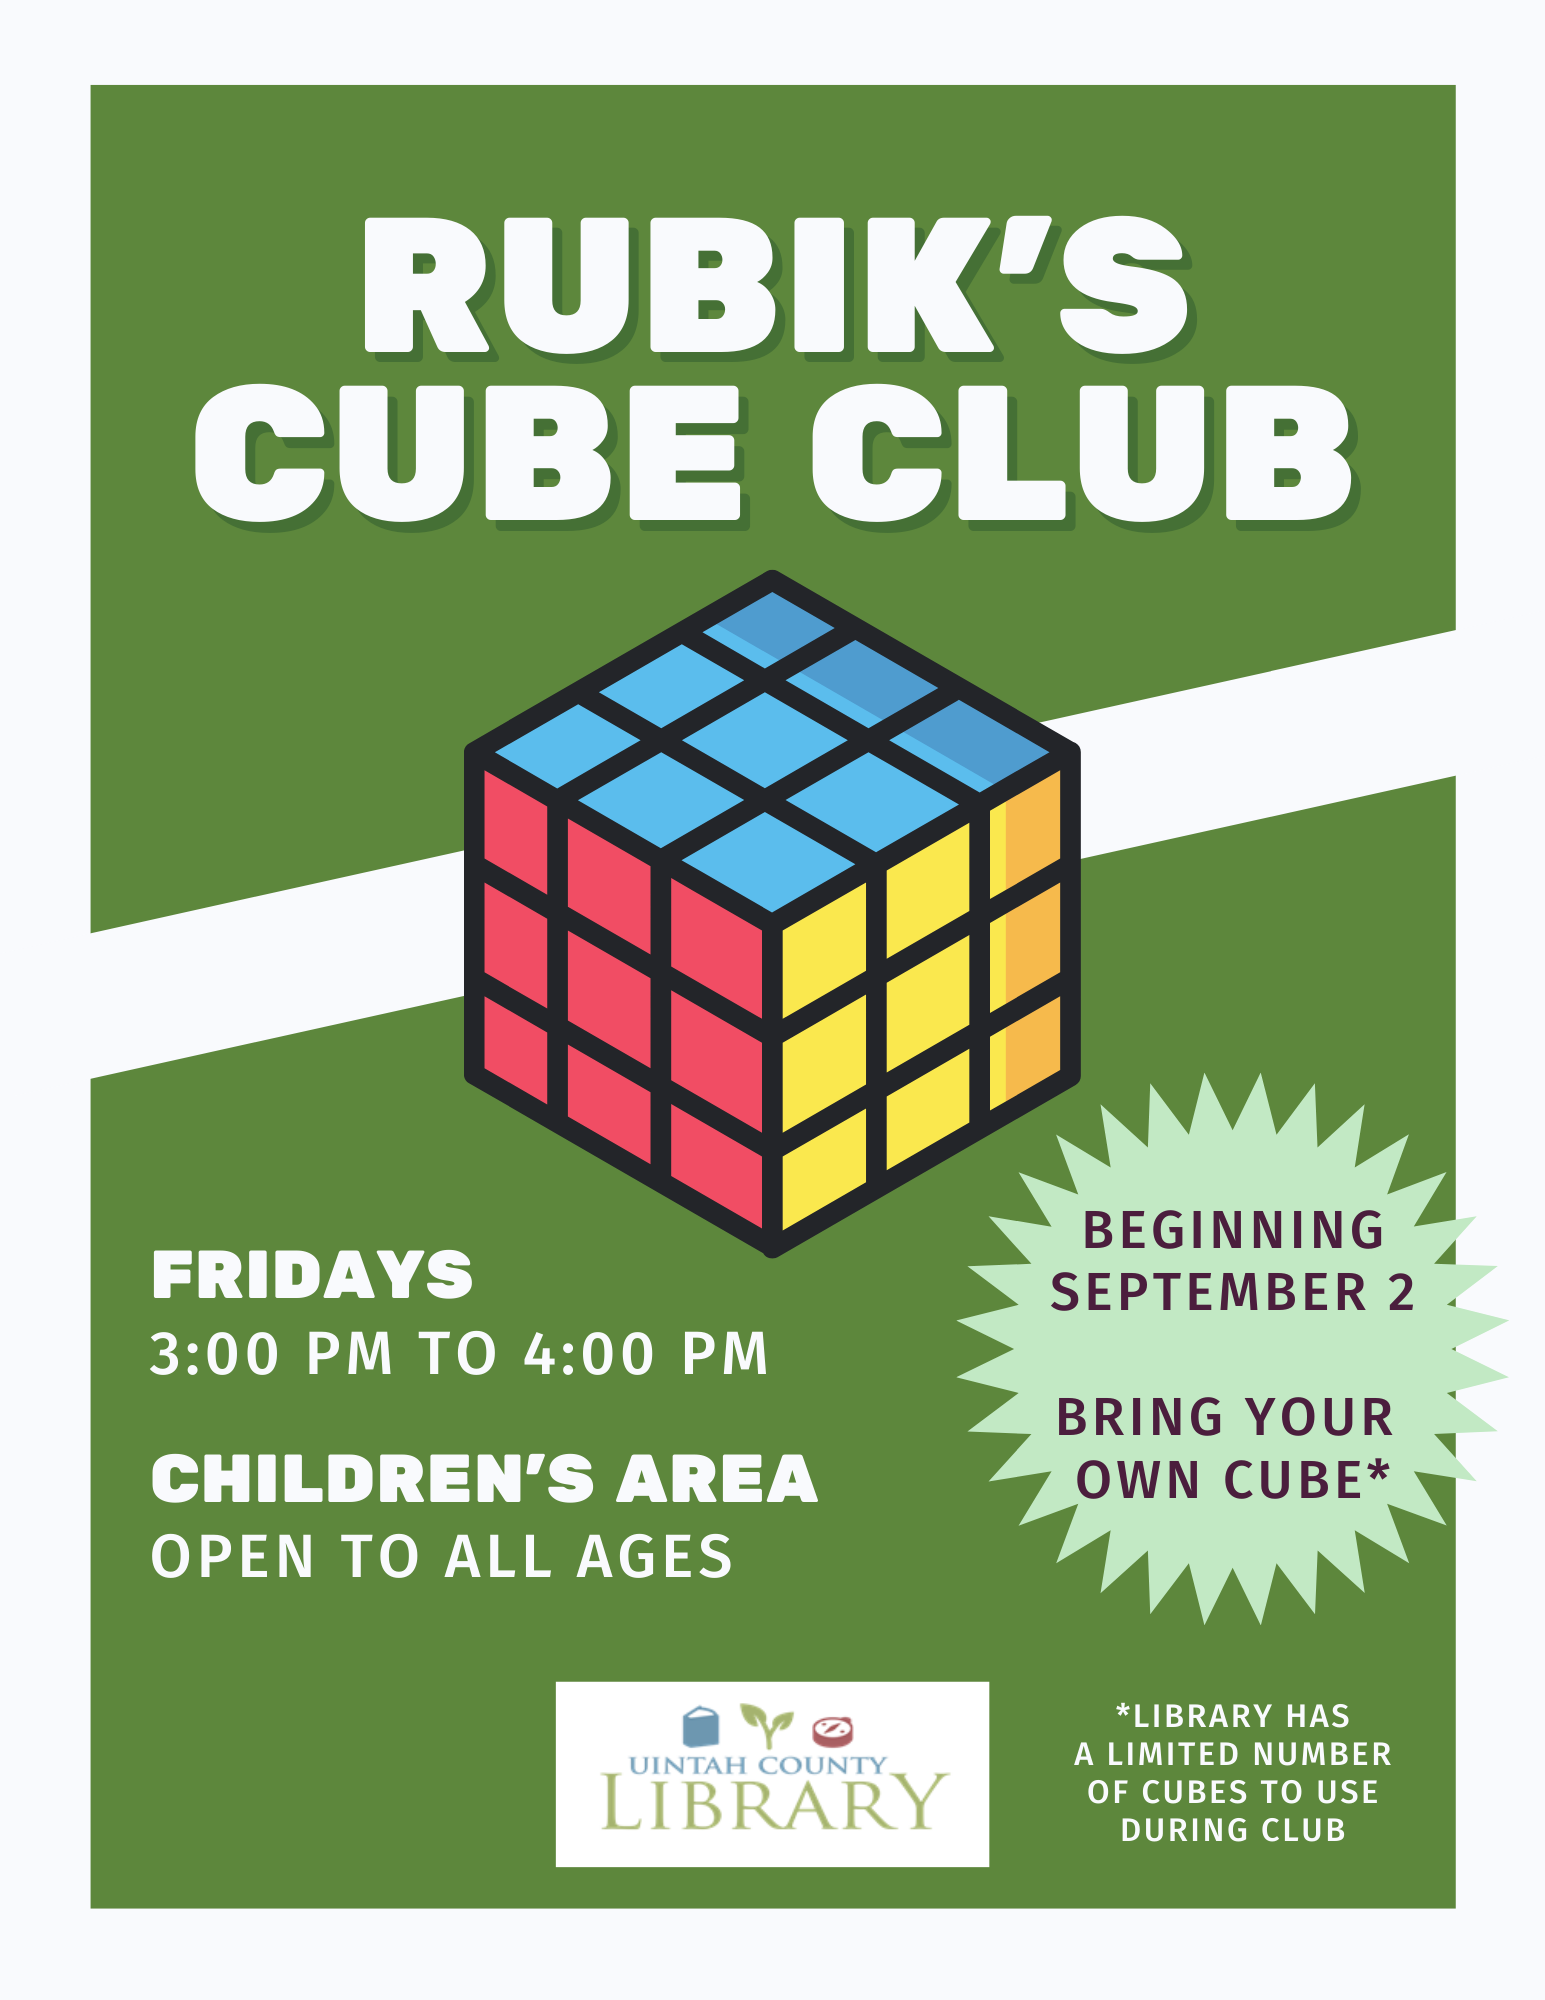 Flyer with Rubik's Cube Club details